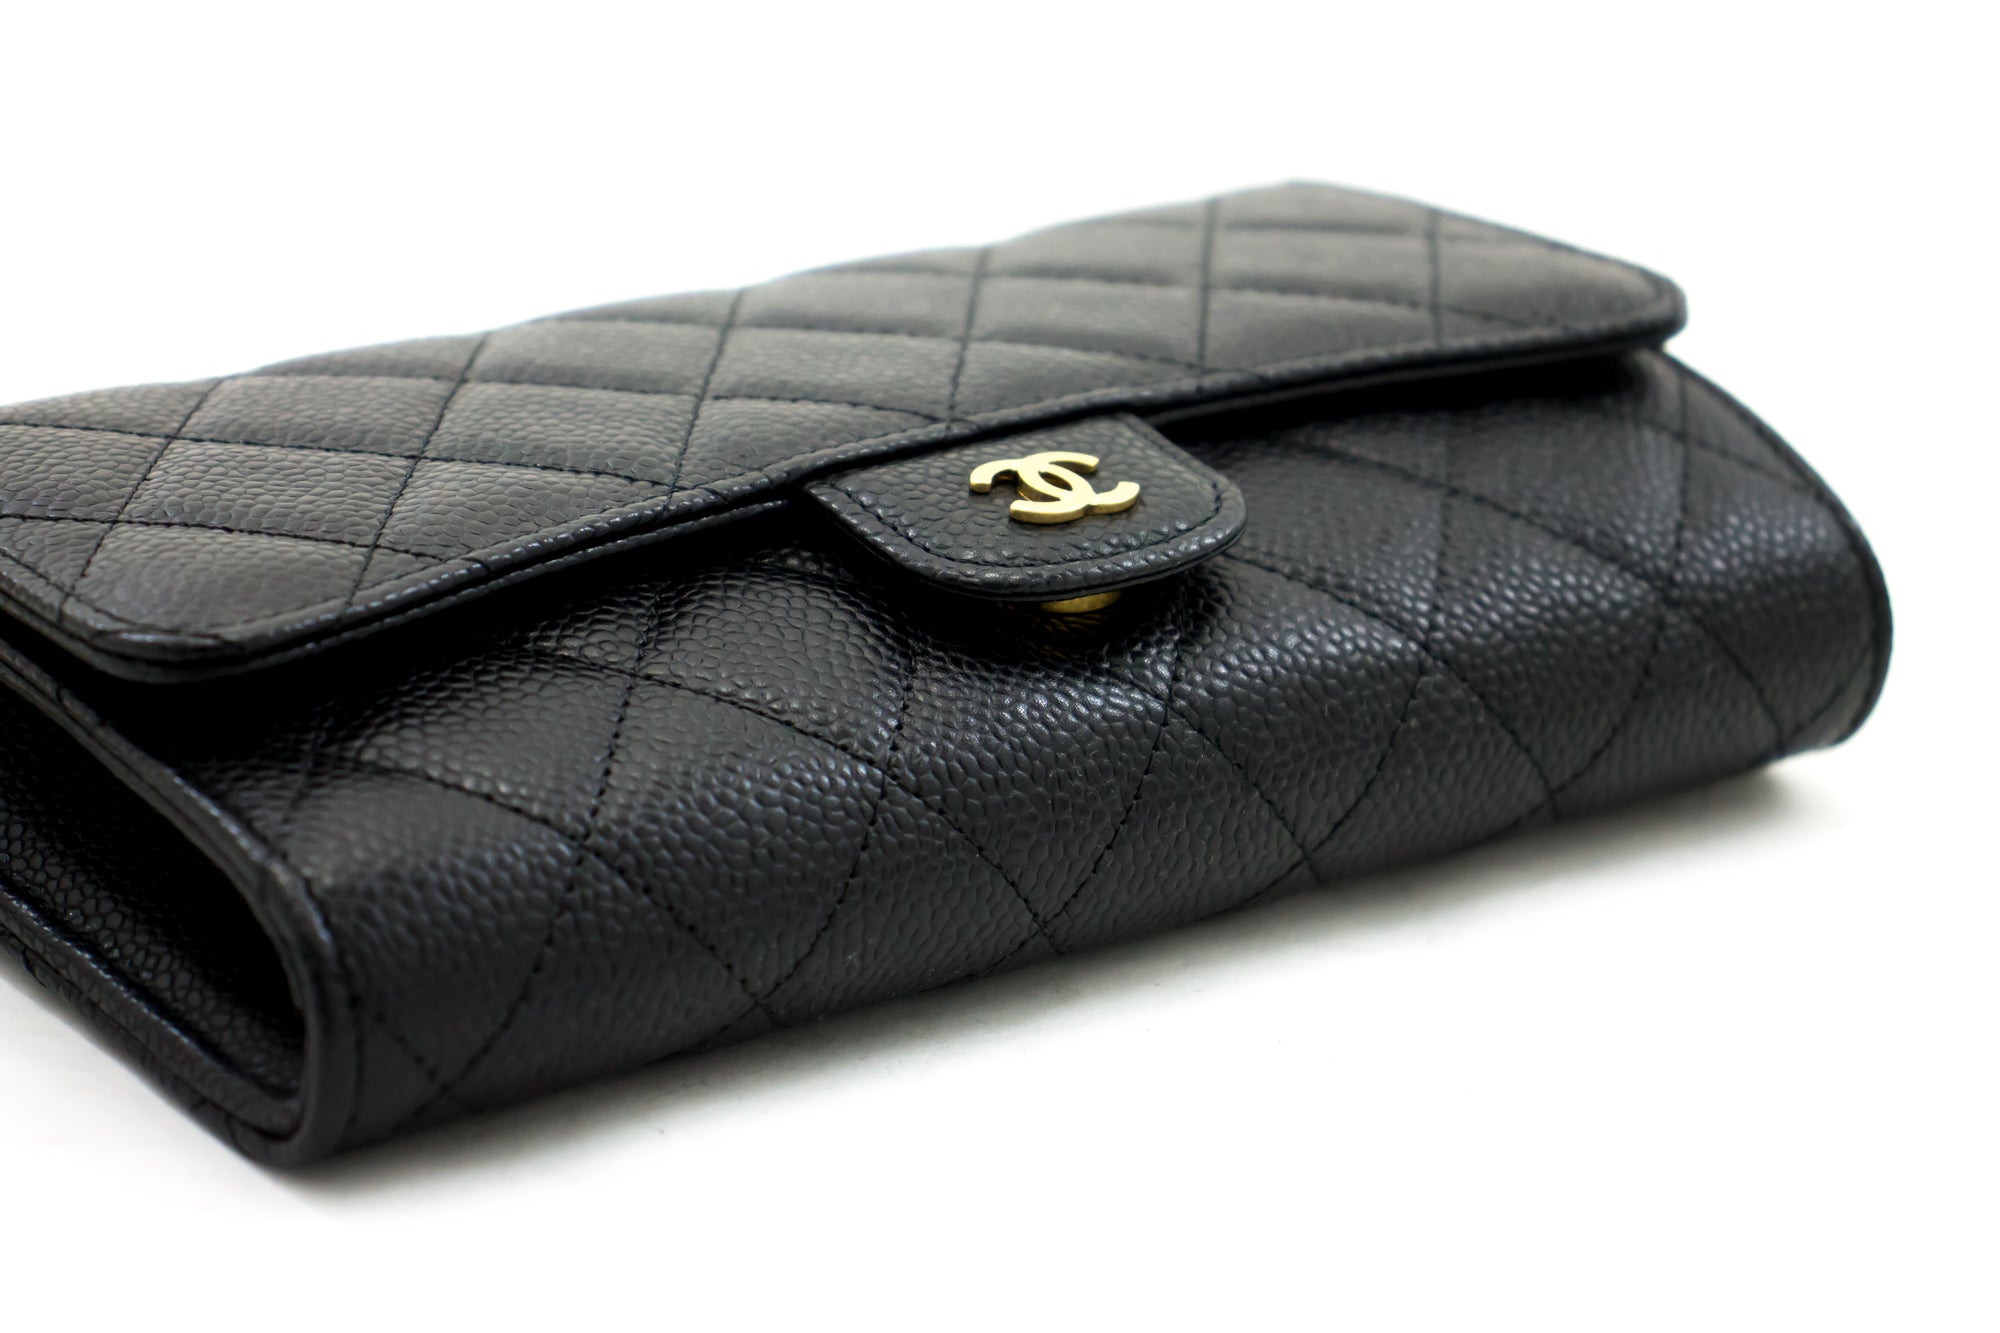 chanel classic caviar wallet on